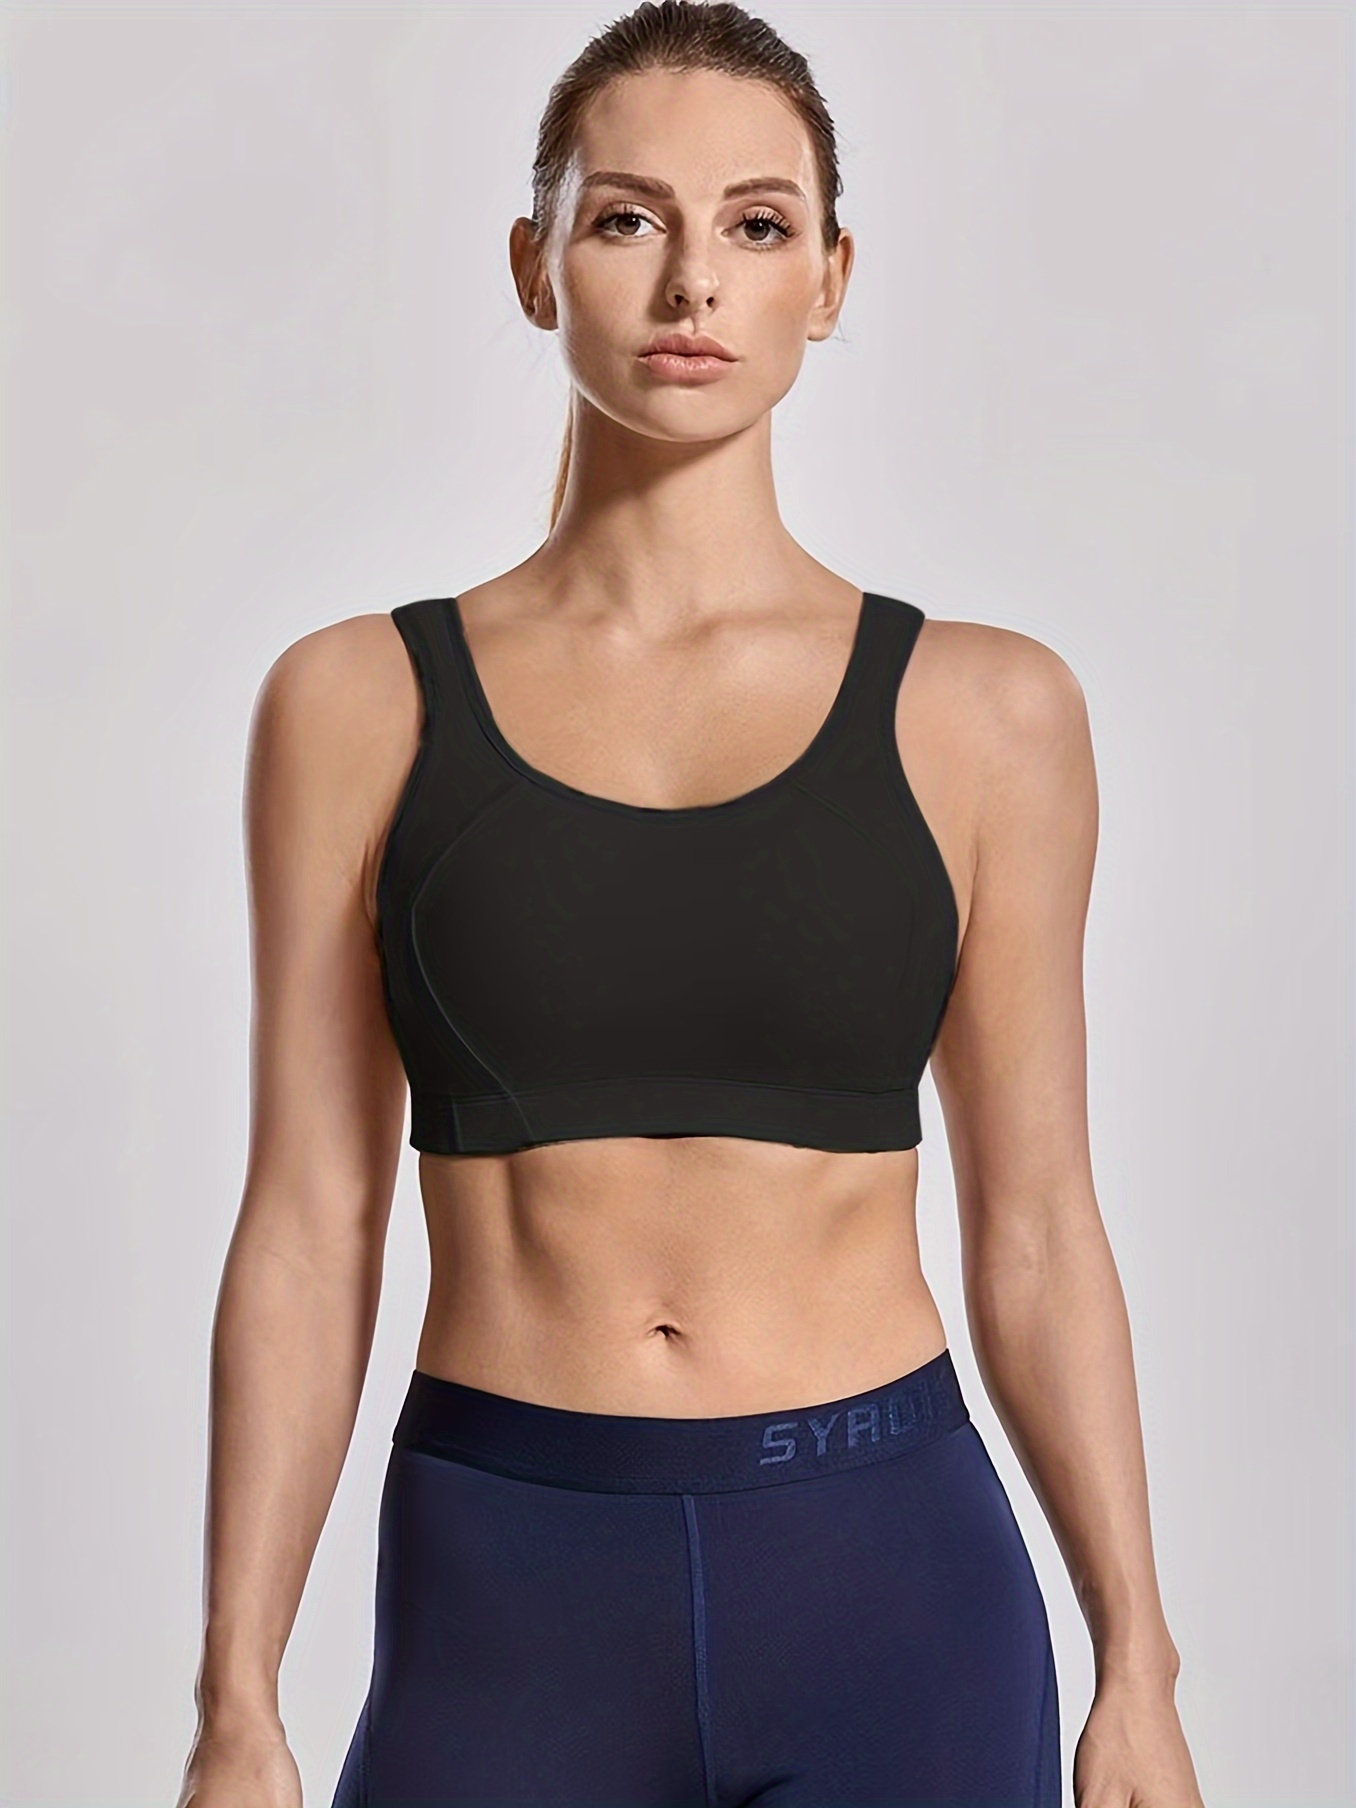 Avia Women's High Impact Full Coverage Bonded Sports Bra XL Cup Sizes A - C